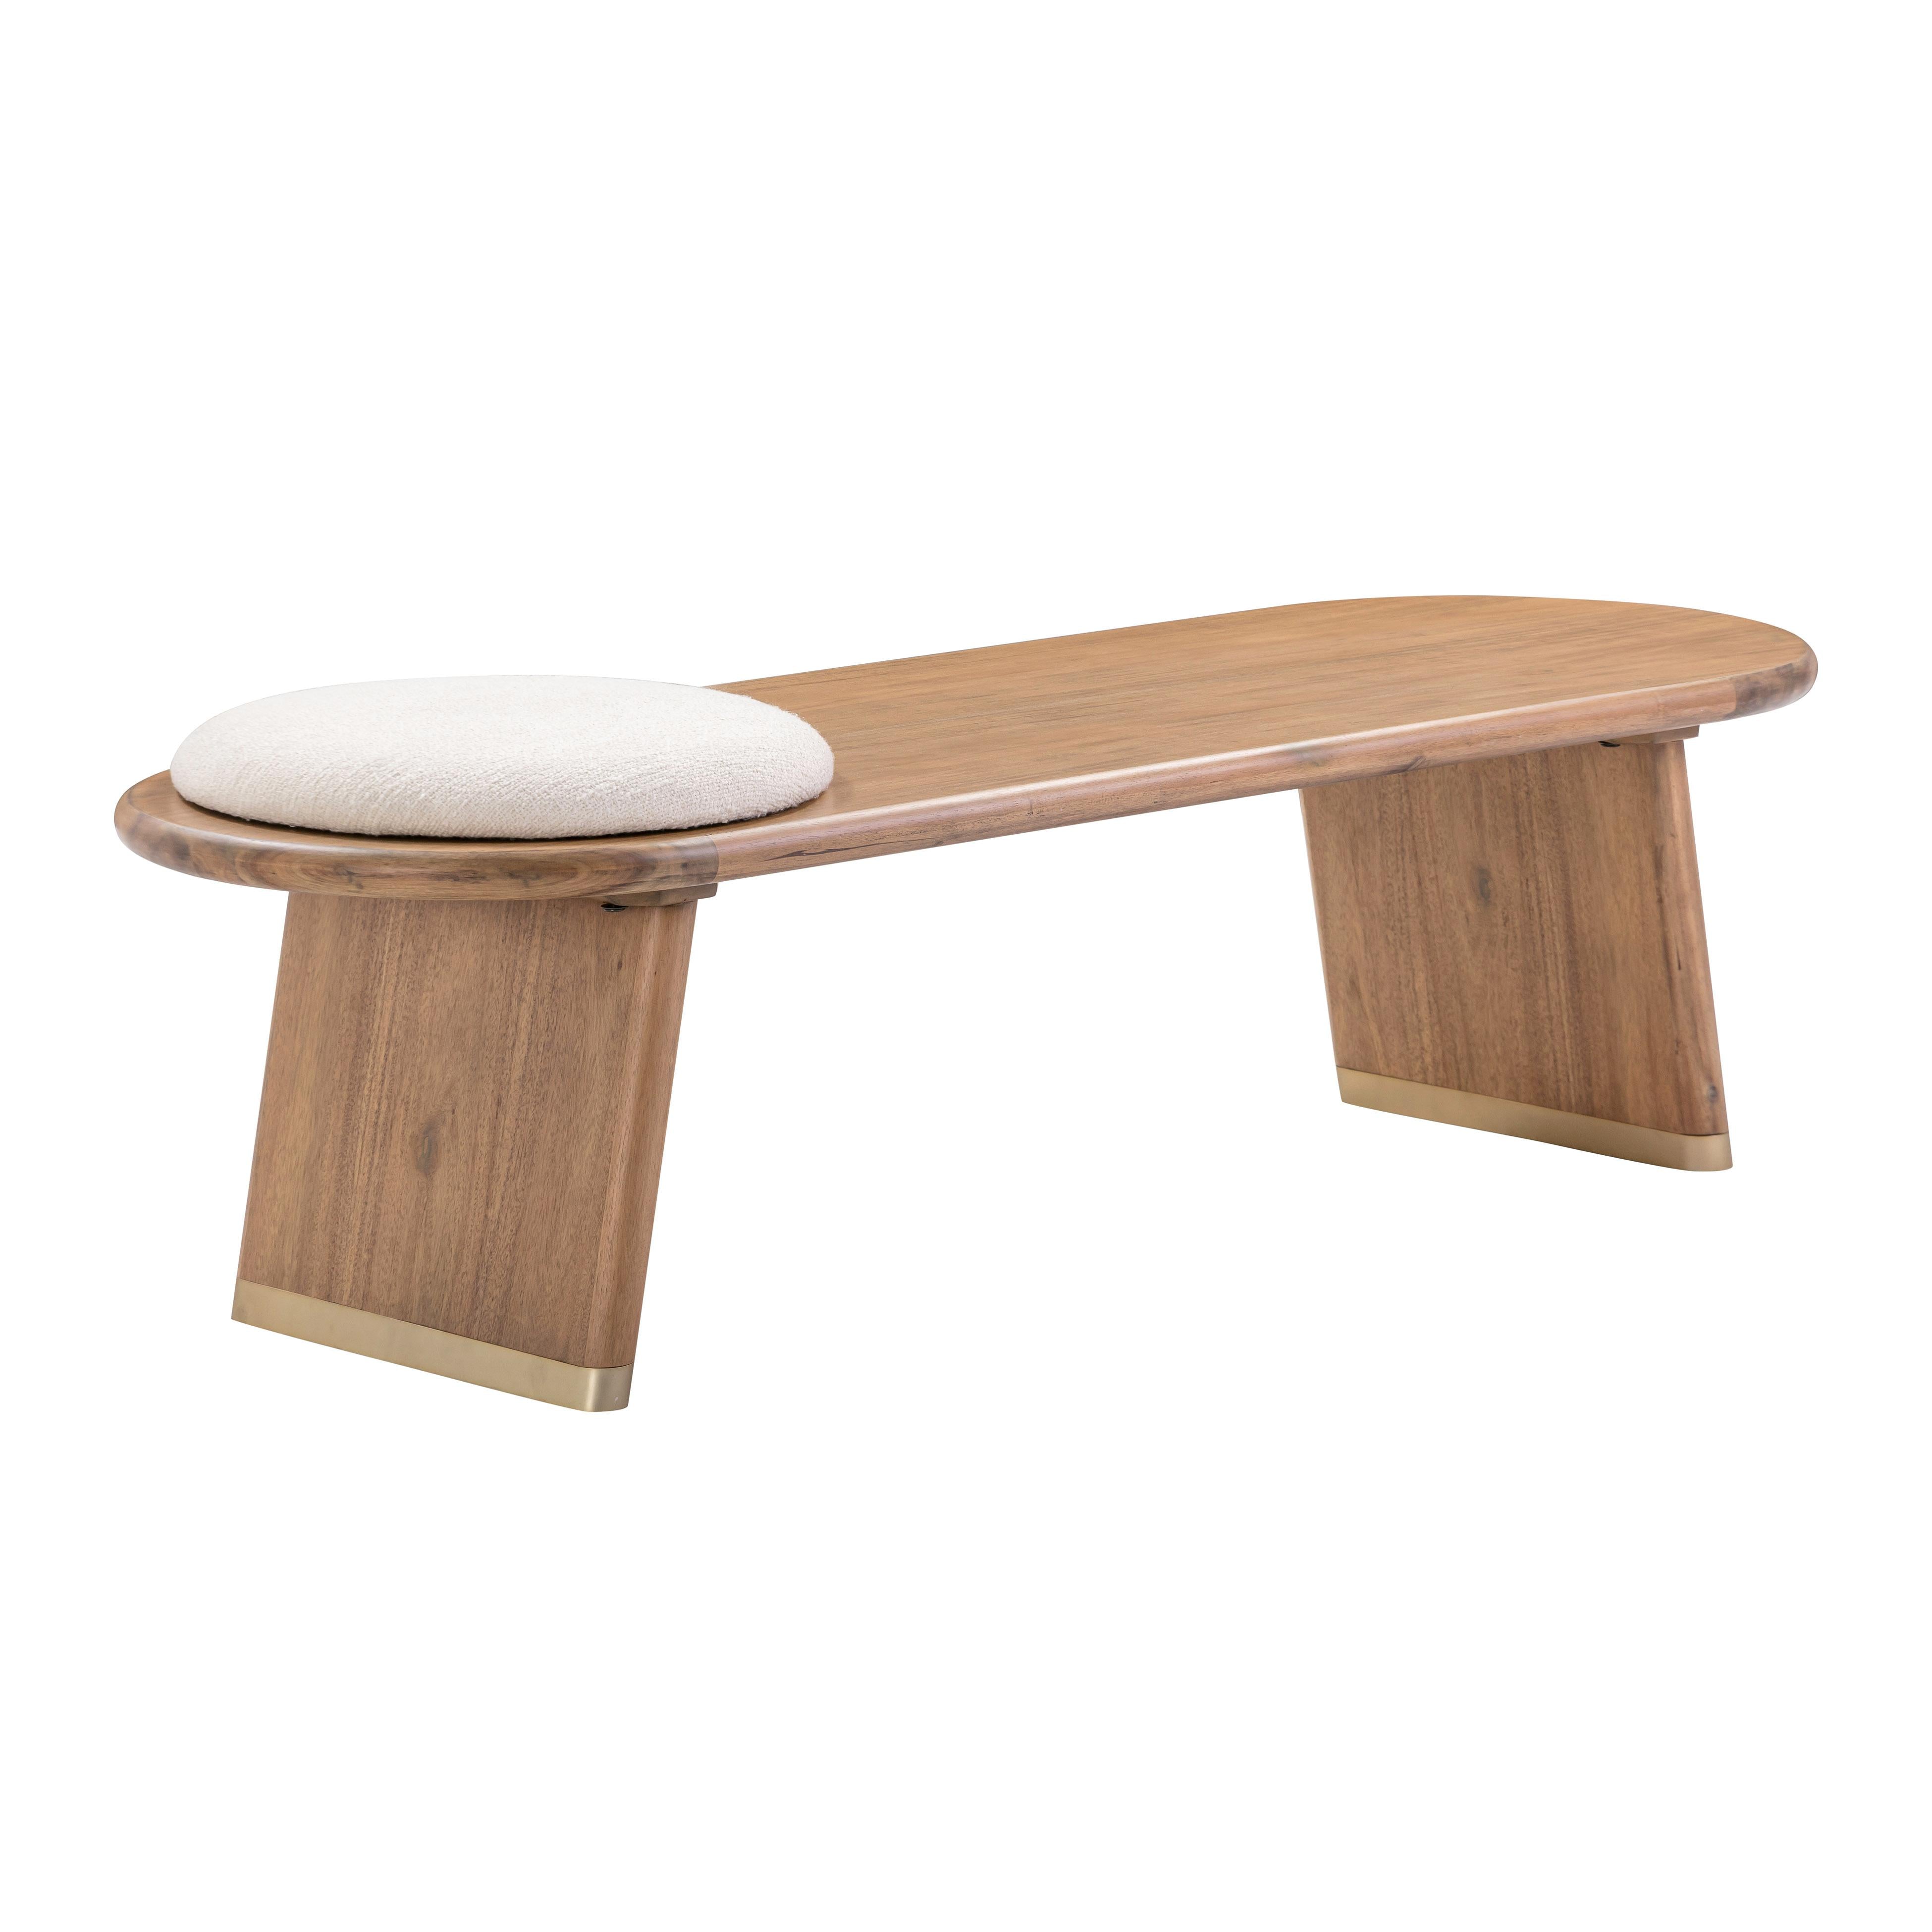 Tov Furniture Benches - Samantha Cognac Acacia Bench with Boucle Seat